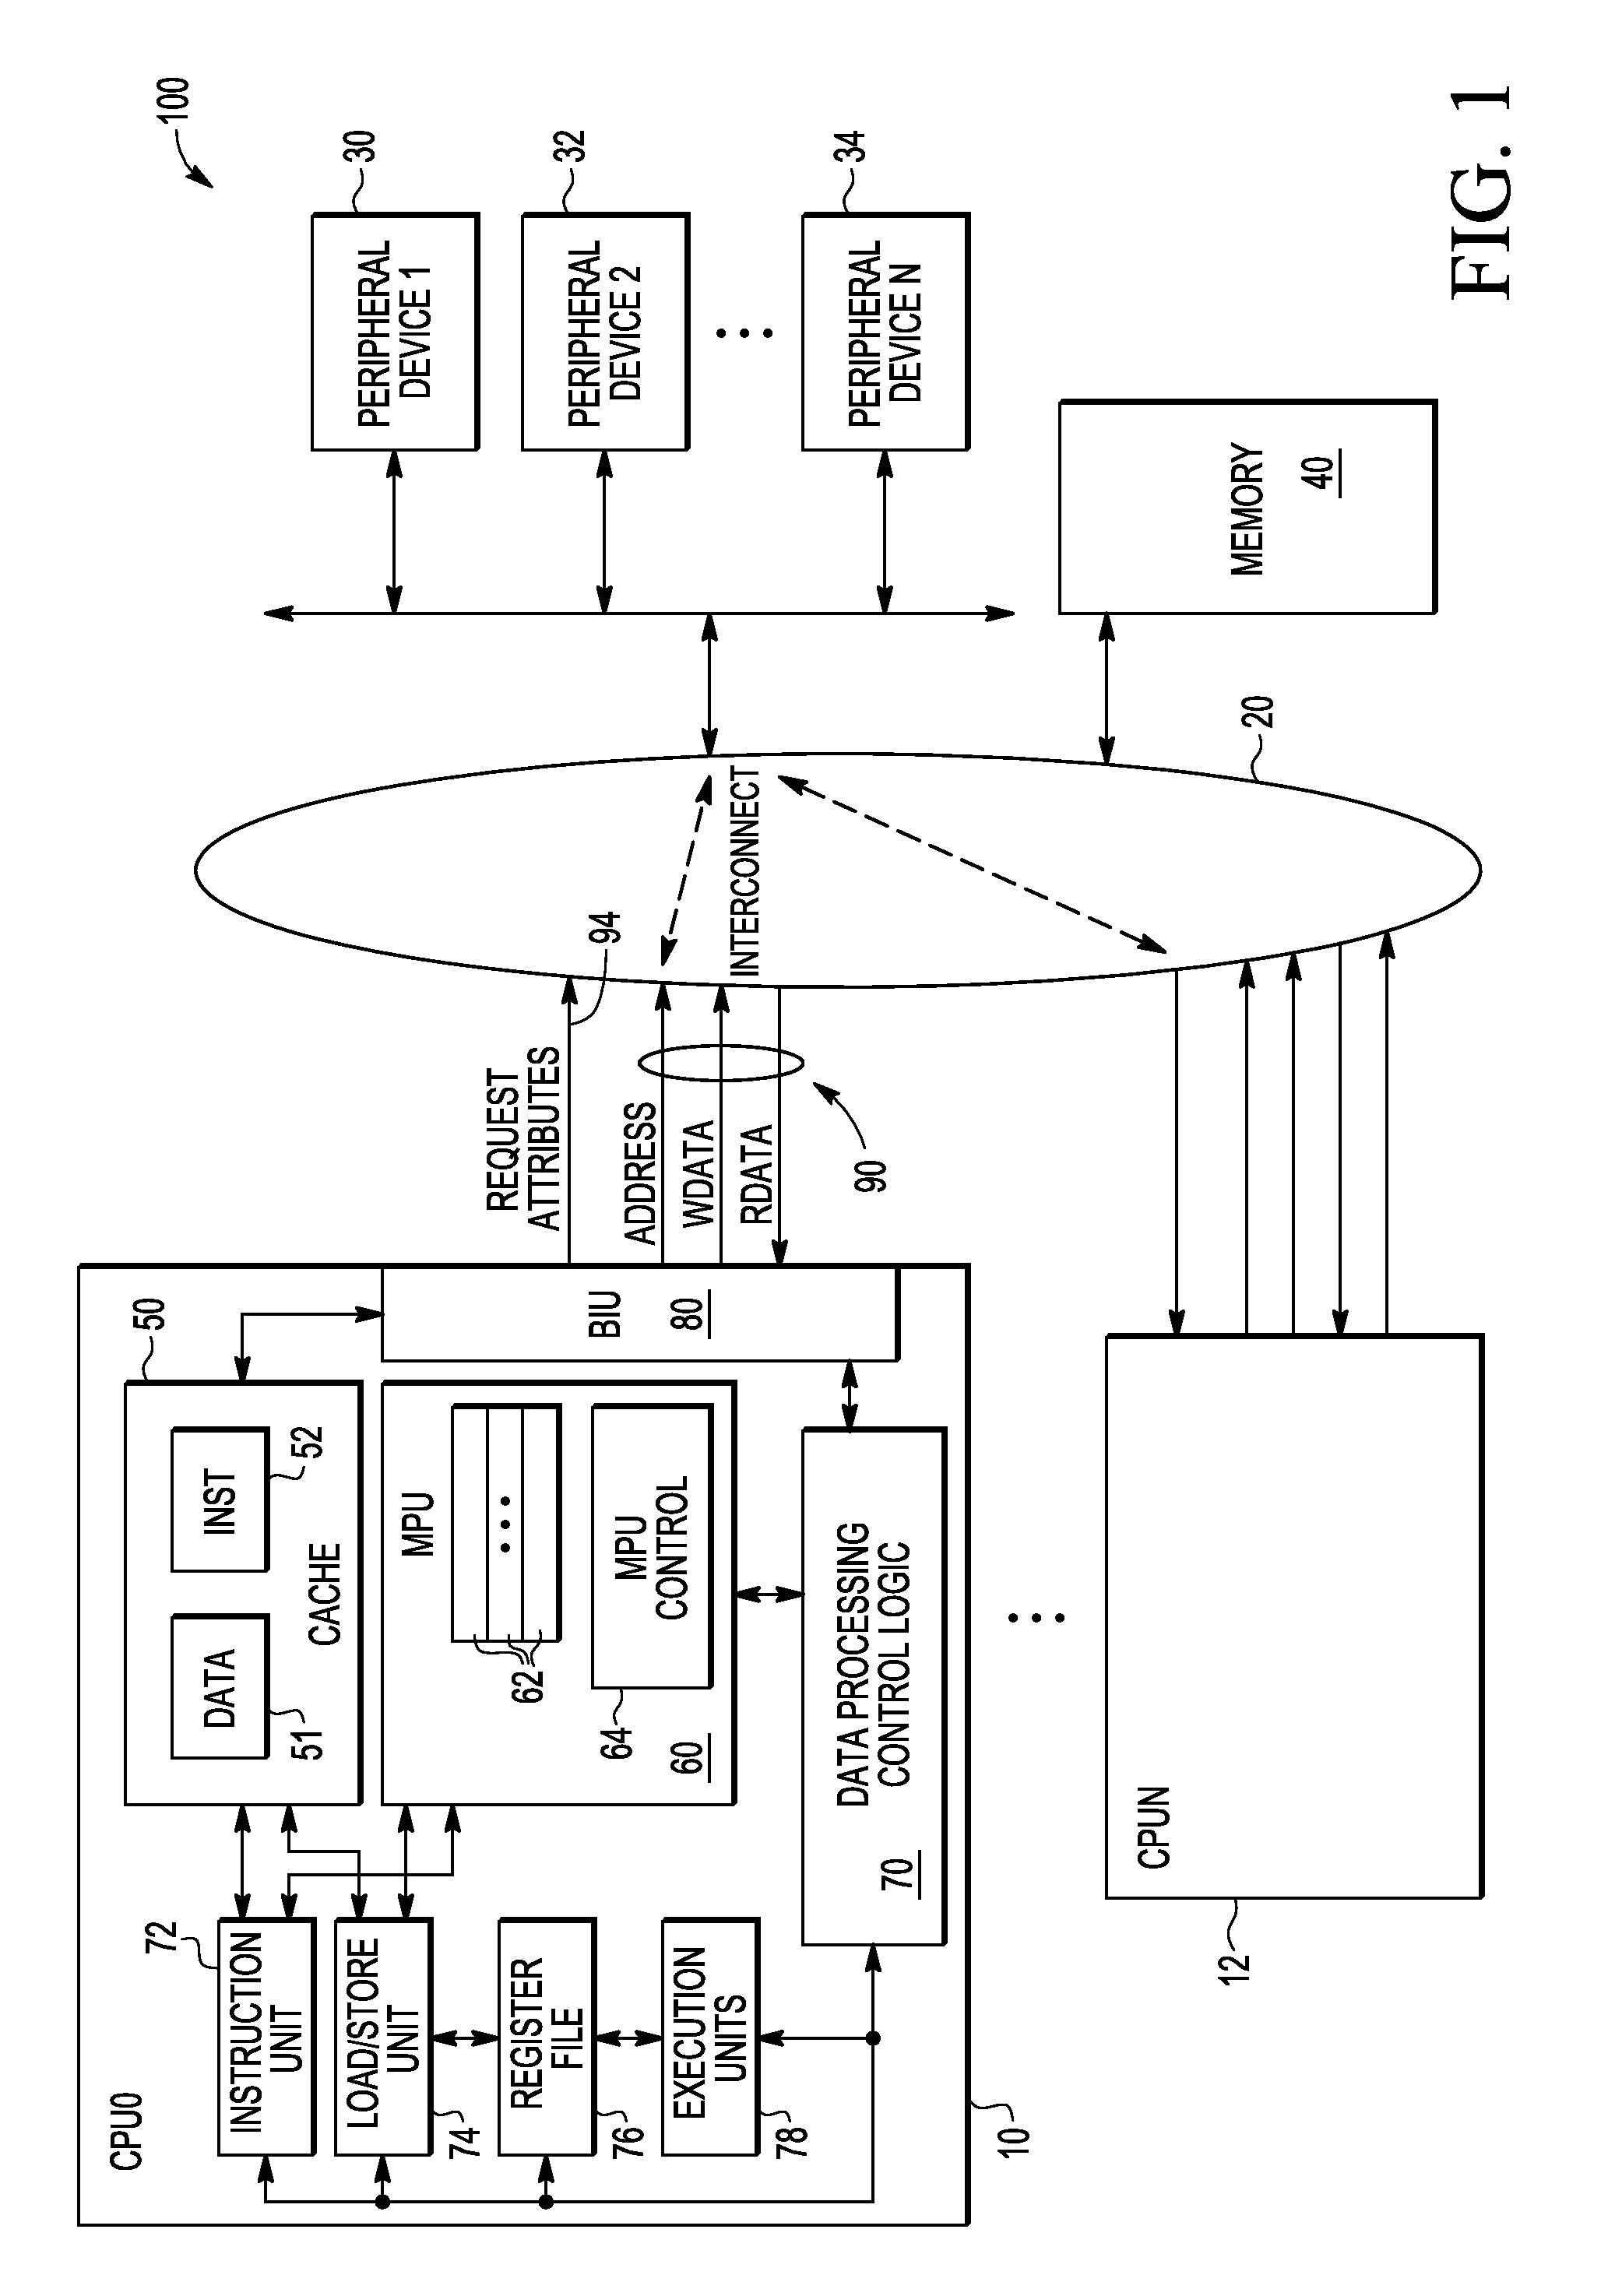 Memory protection unit (MPU) having a shared portion and method of operation